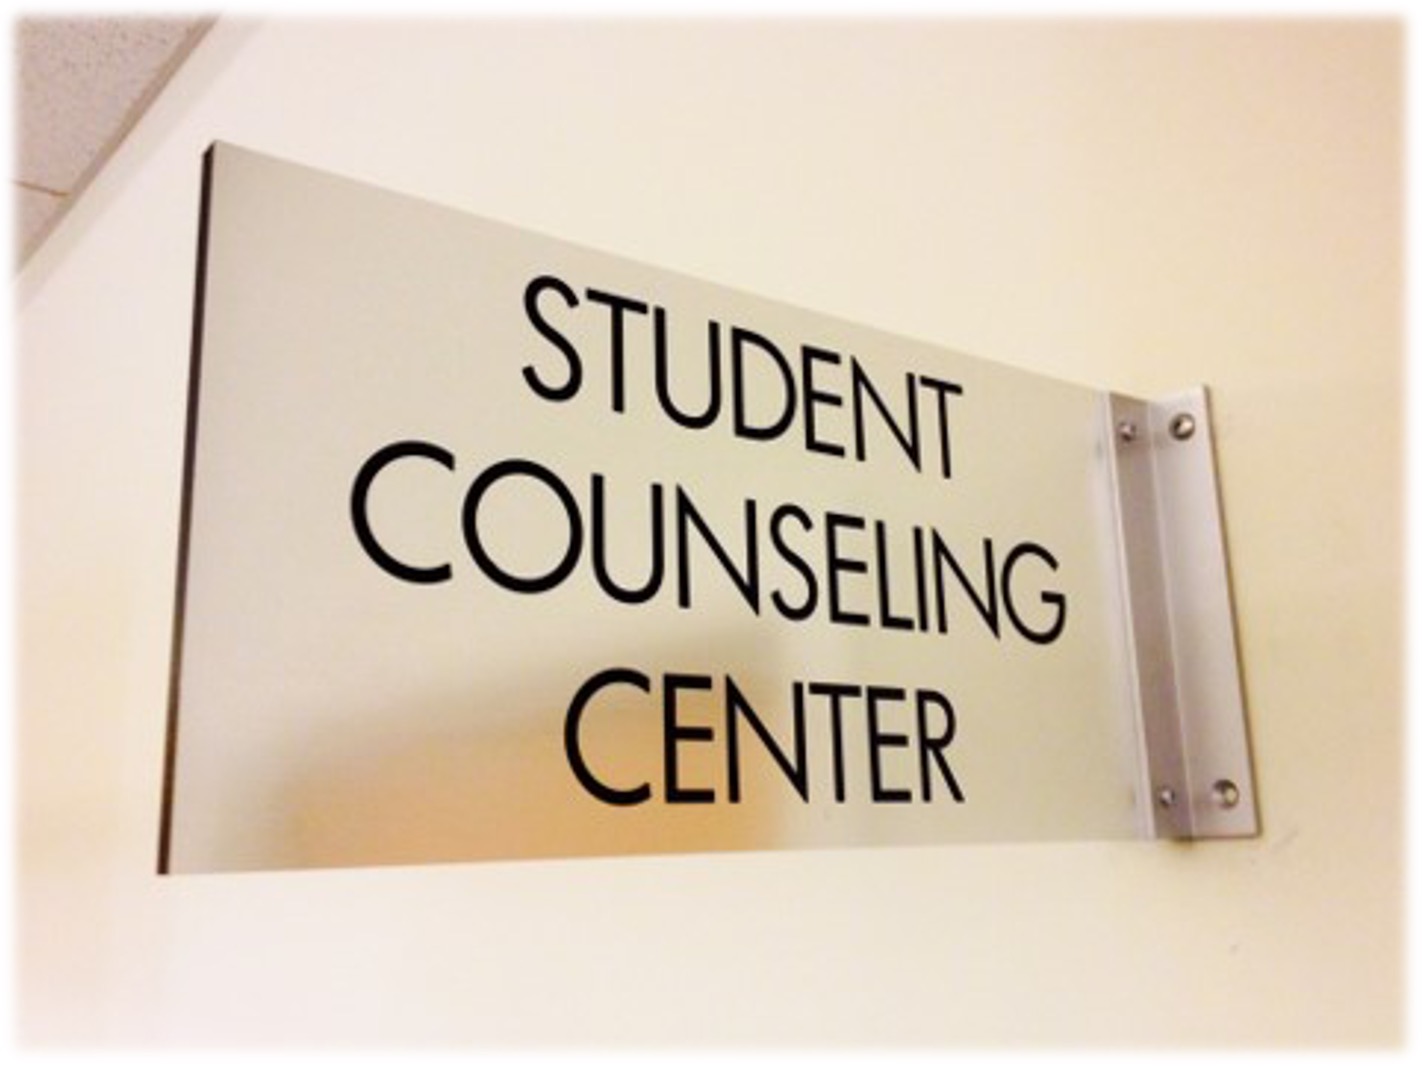 Student Counseling Center sign